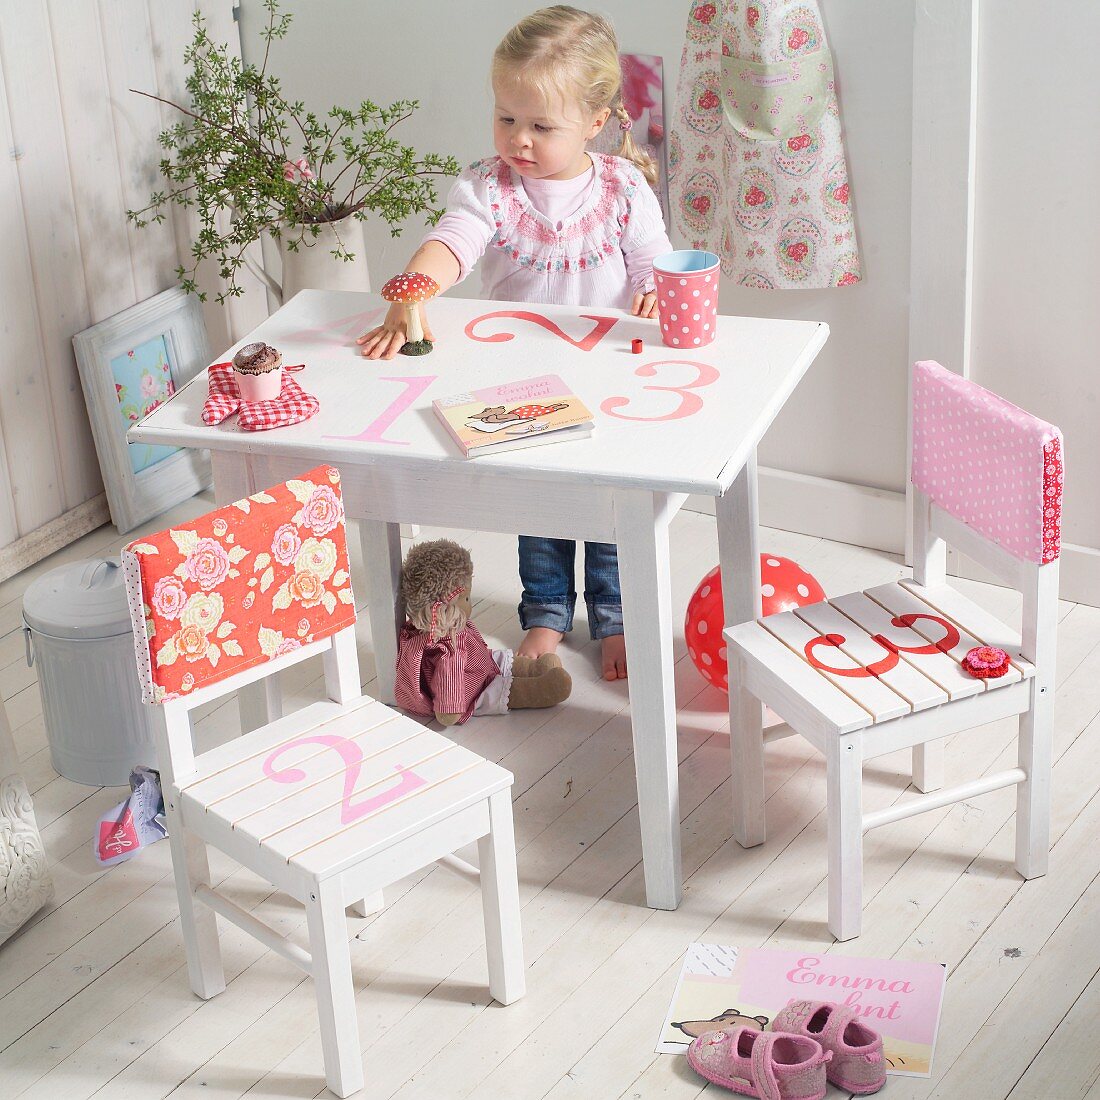 Little girl sitting at white, children's table painted with numbers; chairs with patterned, fabric backrest covers